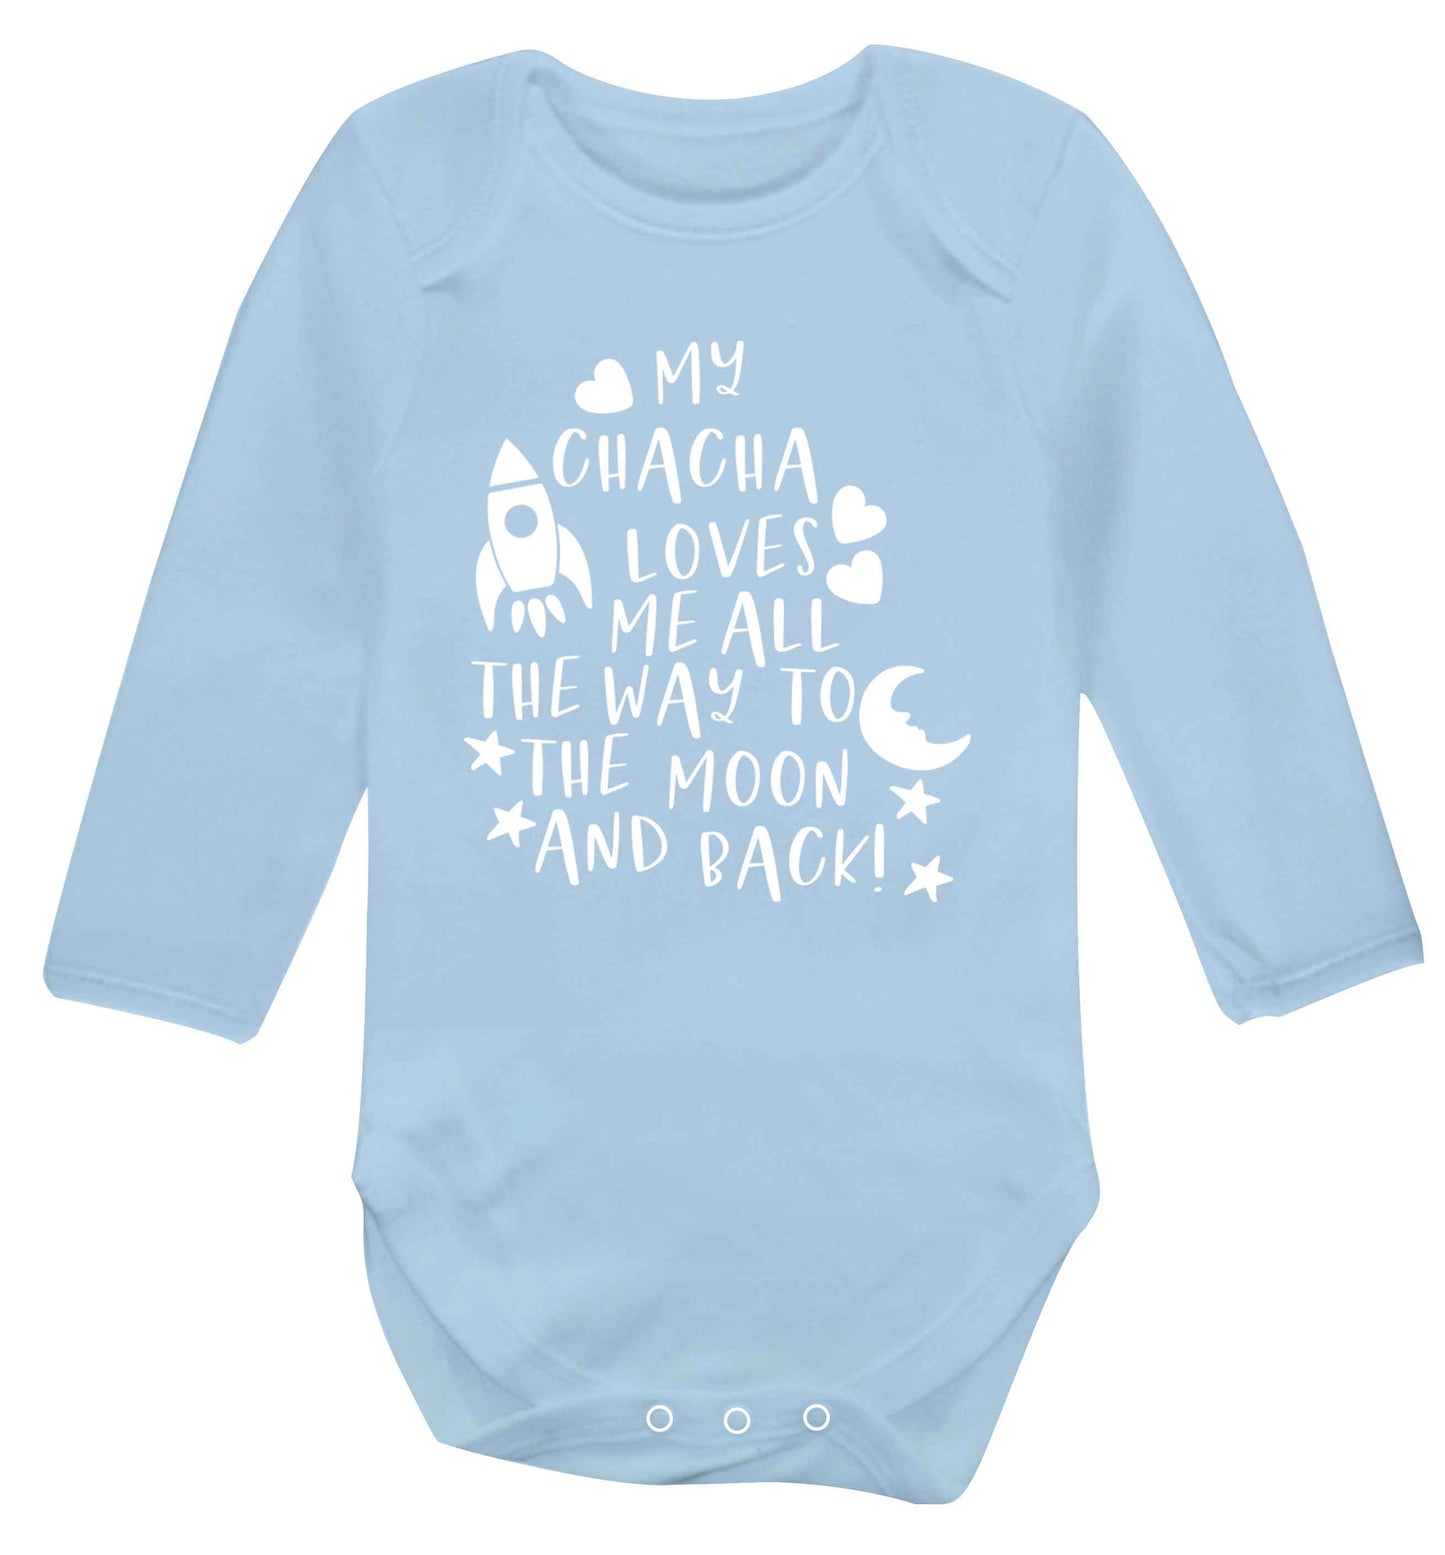 My chacha loves me all the way to the moon and back Baby Vest long sleeved pale blue 6-12 months